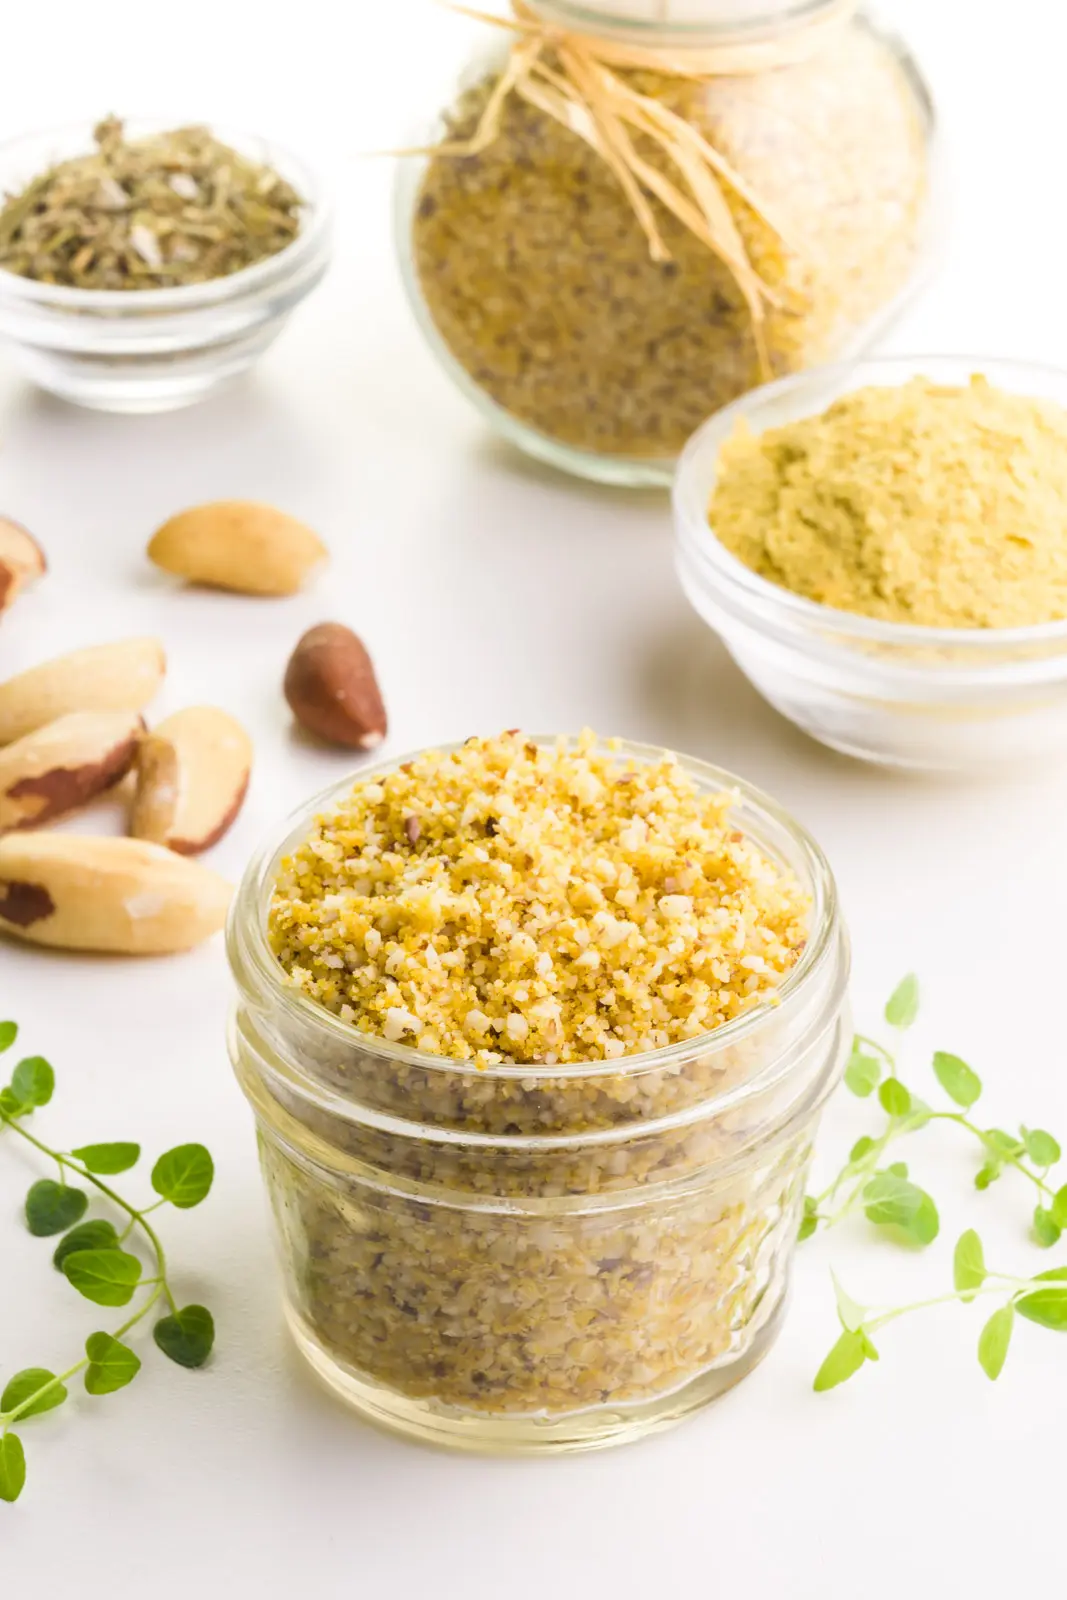 A small glass container of Brazil nut Parmesan has herbs around it. There are Brazil nuts and bowls of ingredients in the background. 